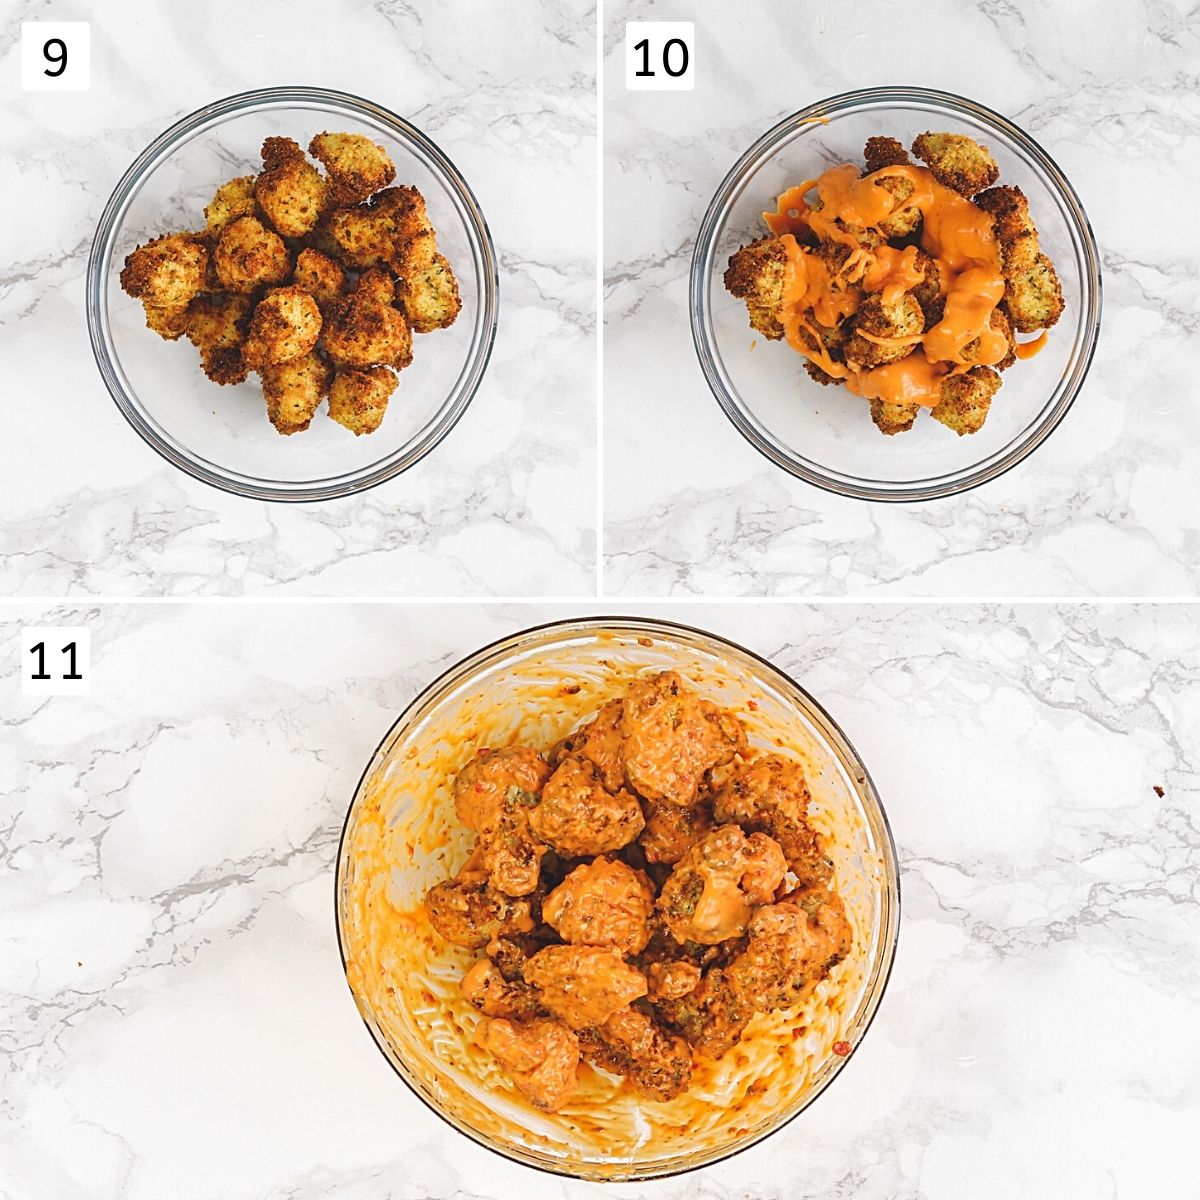 Collage of 3 images showing air fryed florets in a bowl, adding sauce and tossing.